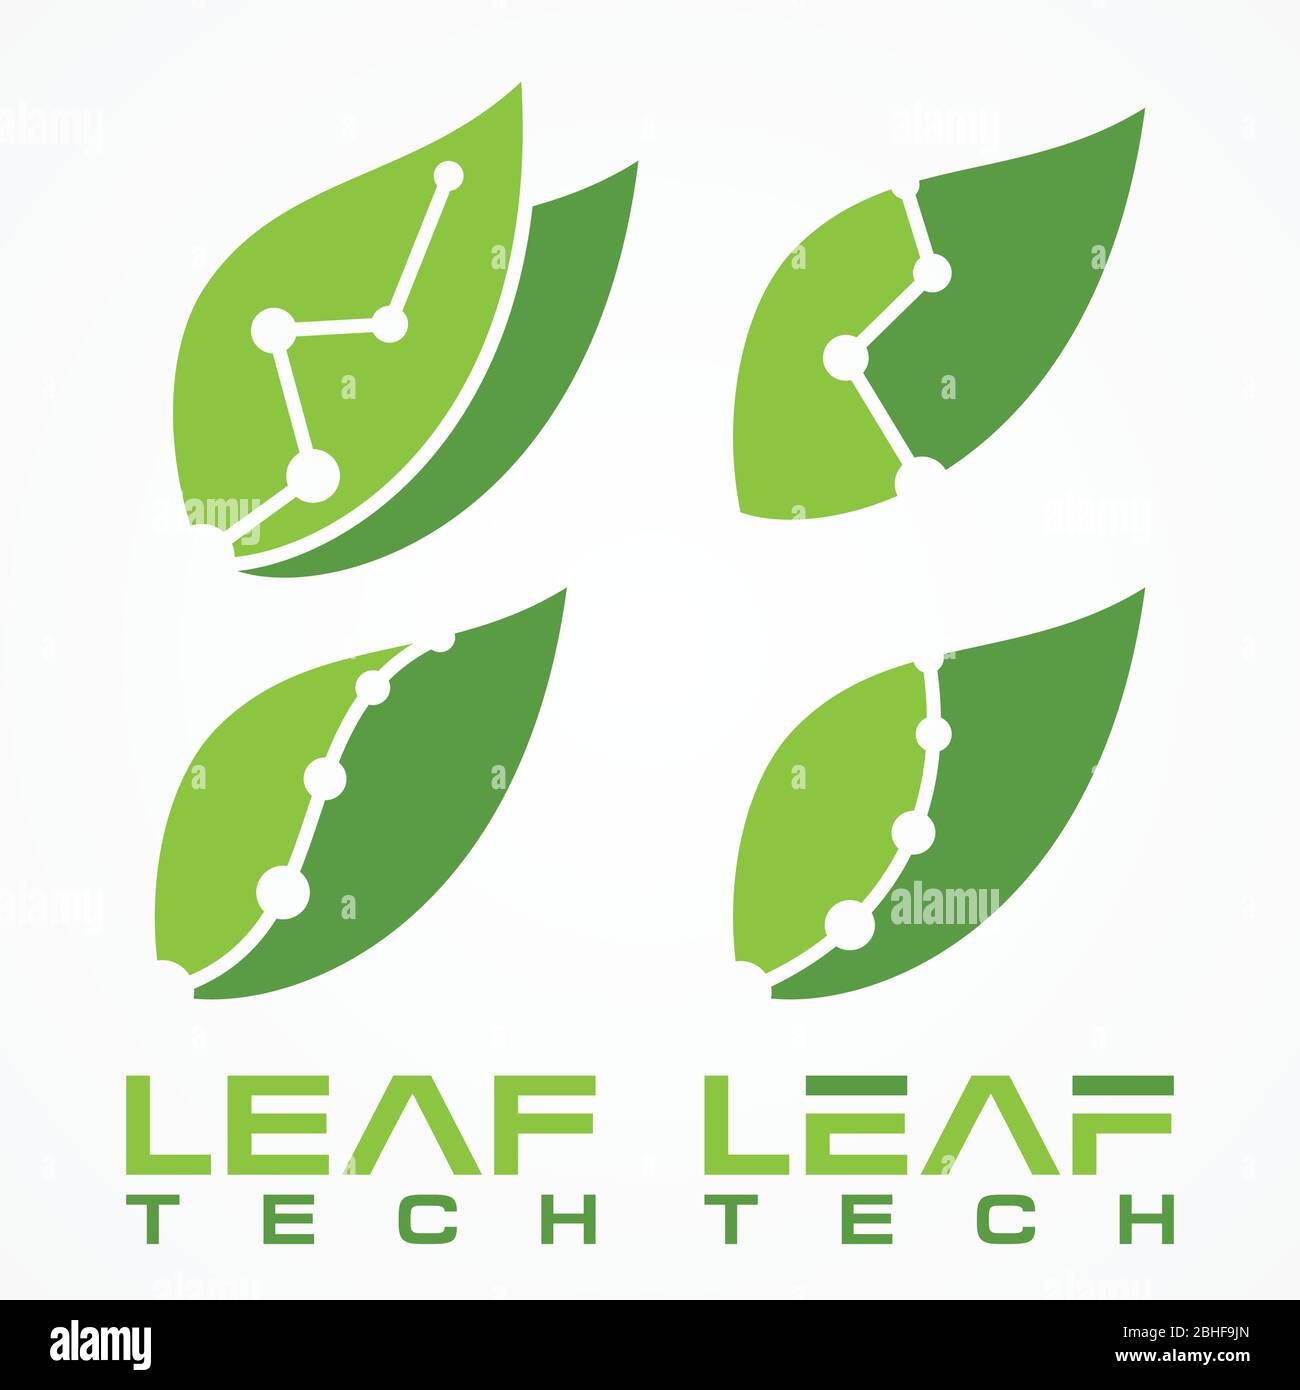 Set green leaf technology vector icon with letter leaf tech. Spring leaves ecology symbols. Green leaf and spring nature organic illustration. Vector Stock Vector